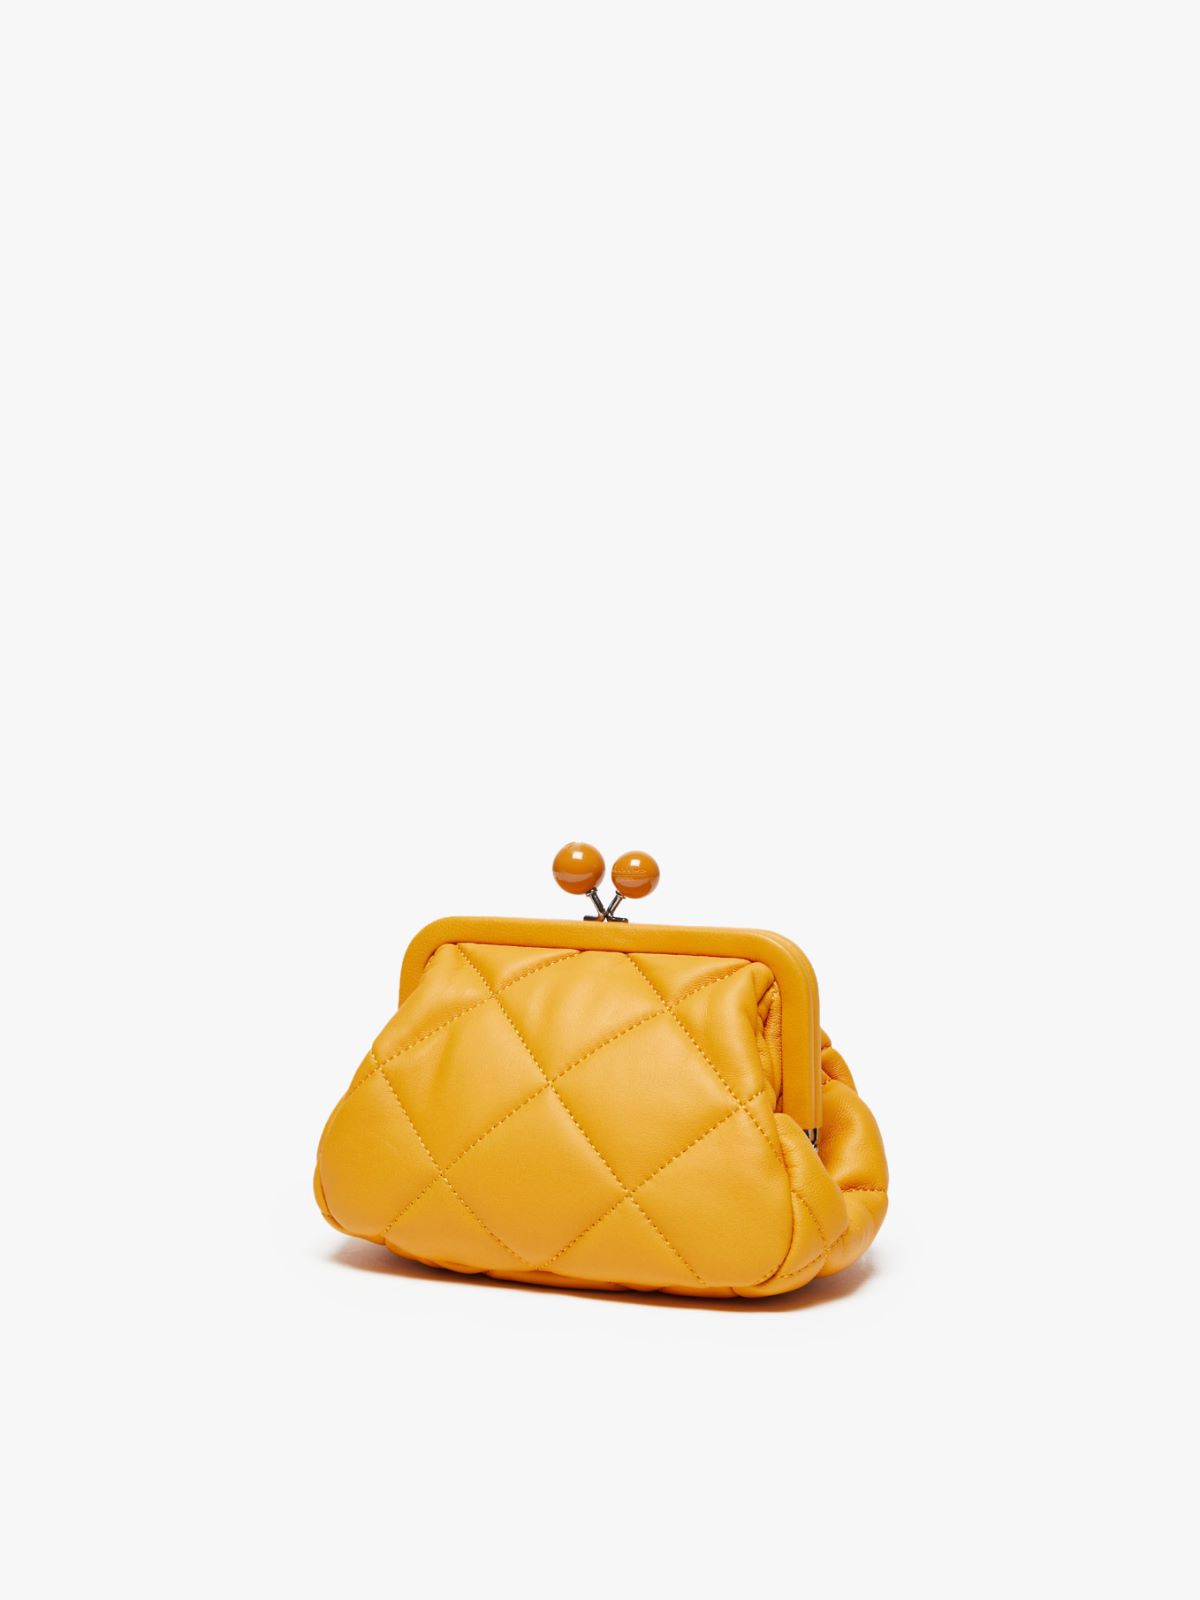 Small Pasticcino Bag in nappa leather - GOLD - Weekend Max Mara - 2